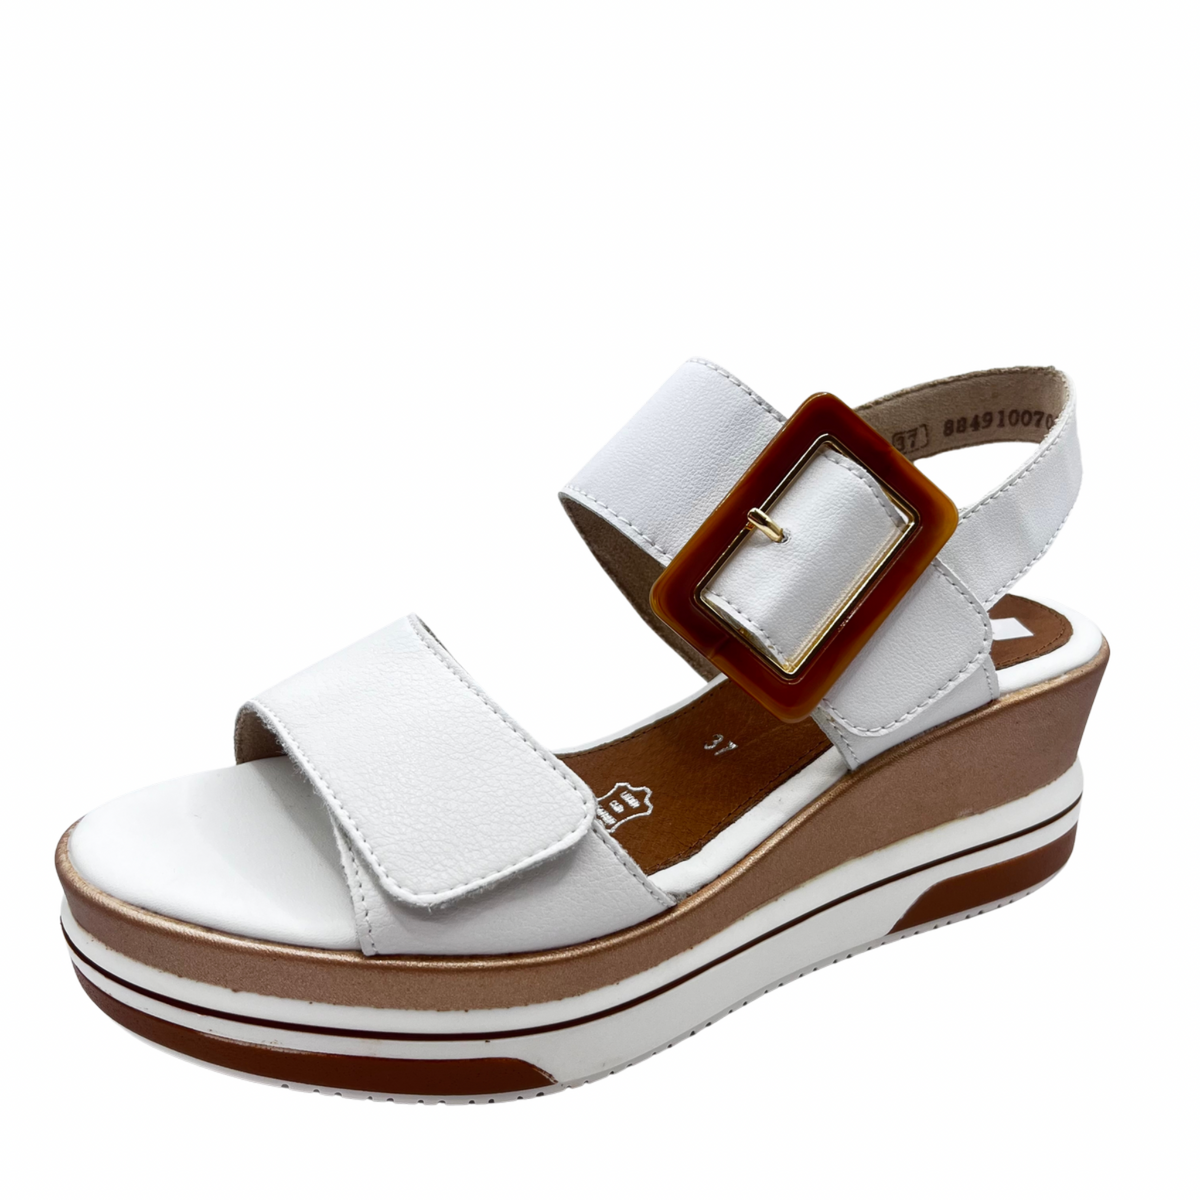 Remonte White and Bronze Wedge Sandal